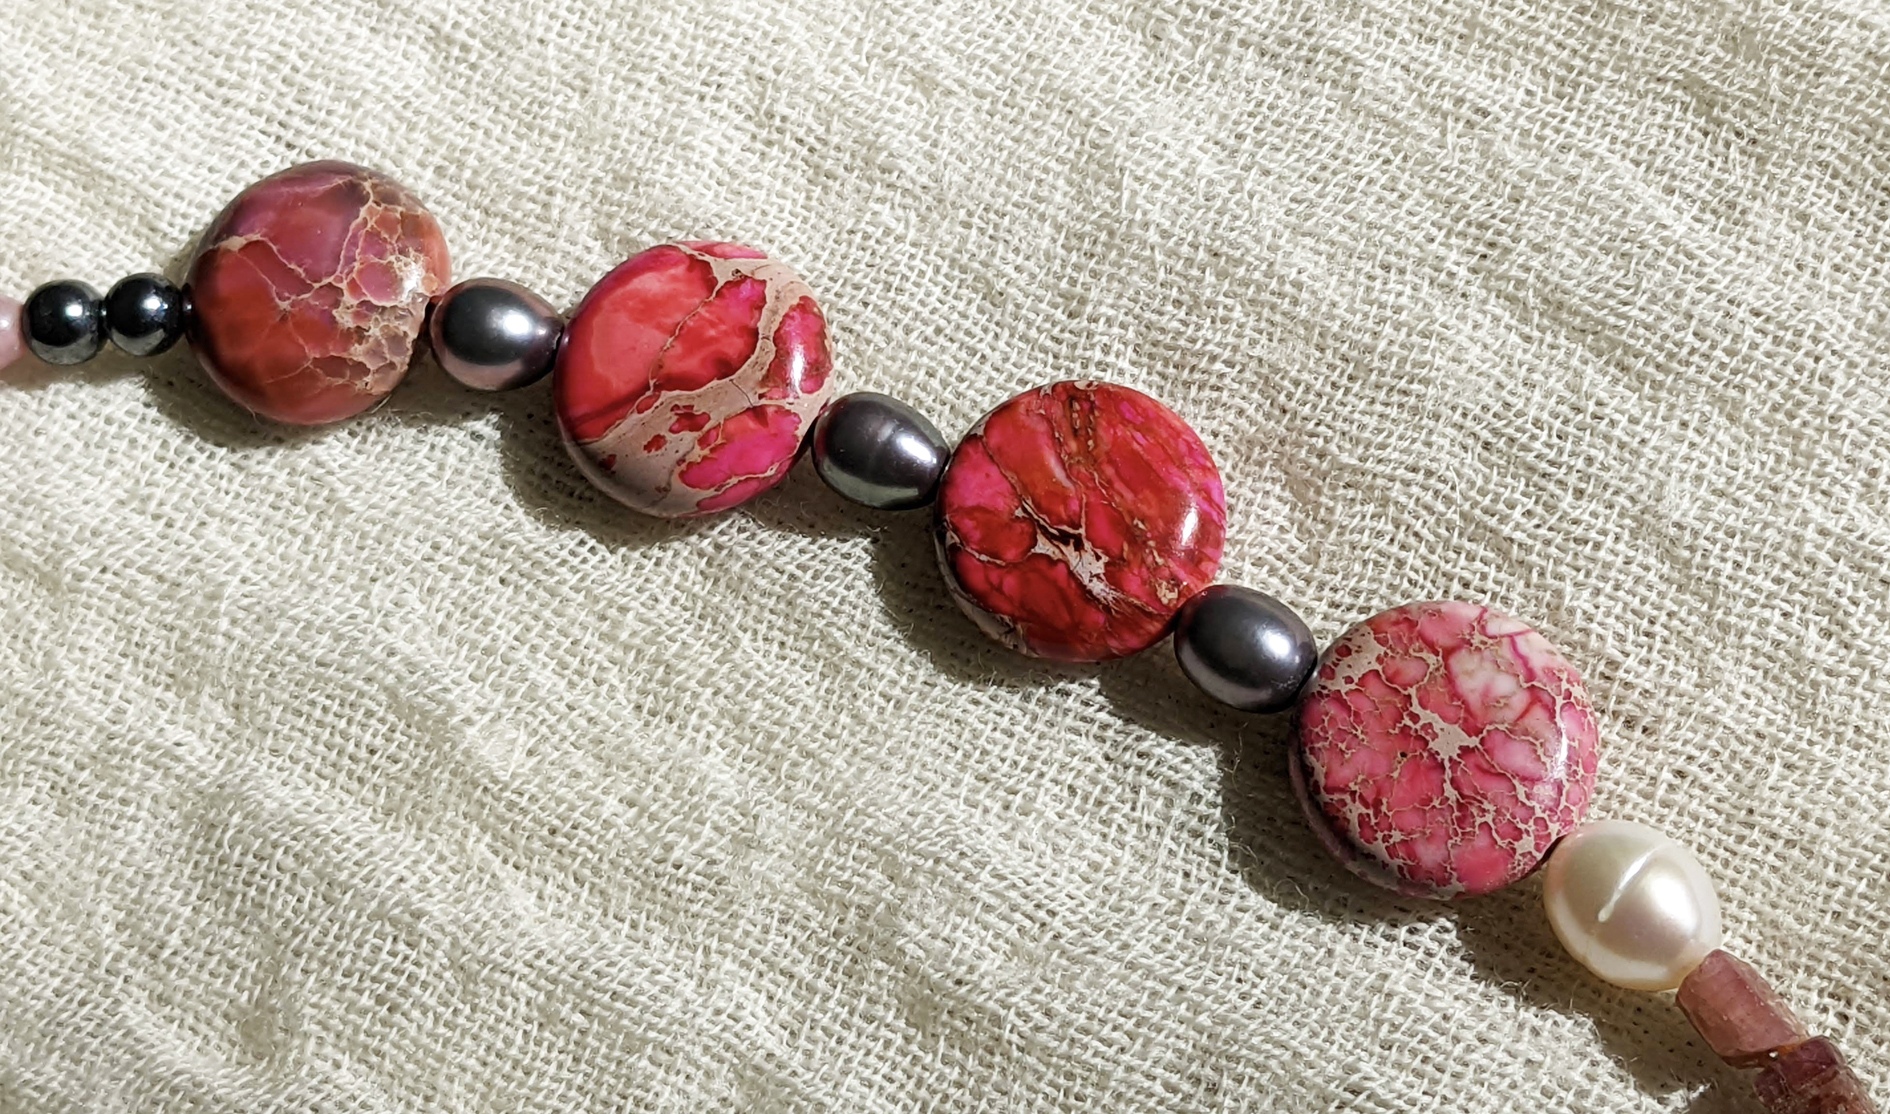 Rhodochrosite Crystal necklace flat, spiritual and healing properties mixed with black and white pearls for protection against any evil energy